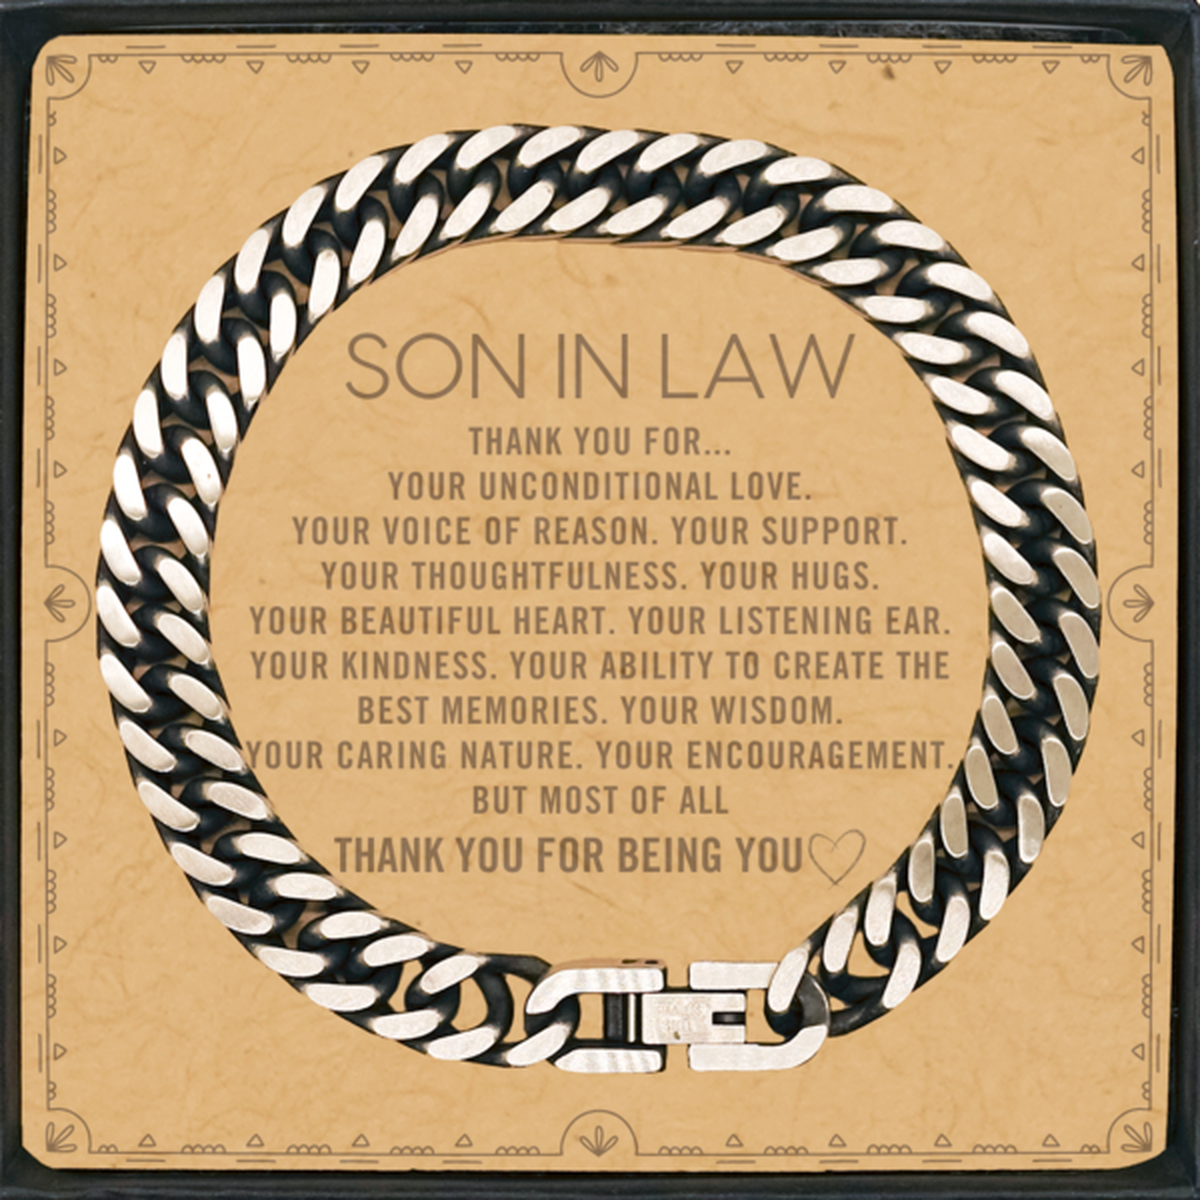 Son In Law Cuban Link Chain Bracelet Custom, Message Card Gifts For Son In Law Christmas Graduation Birthday Gifts for Men Women Son In Law Thank you for Your unconditional love